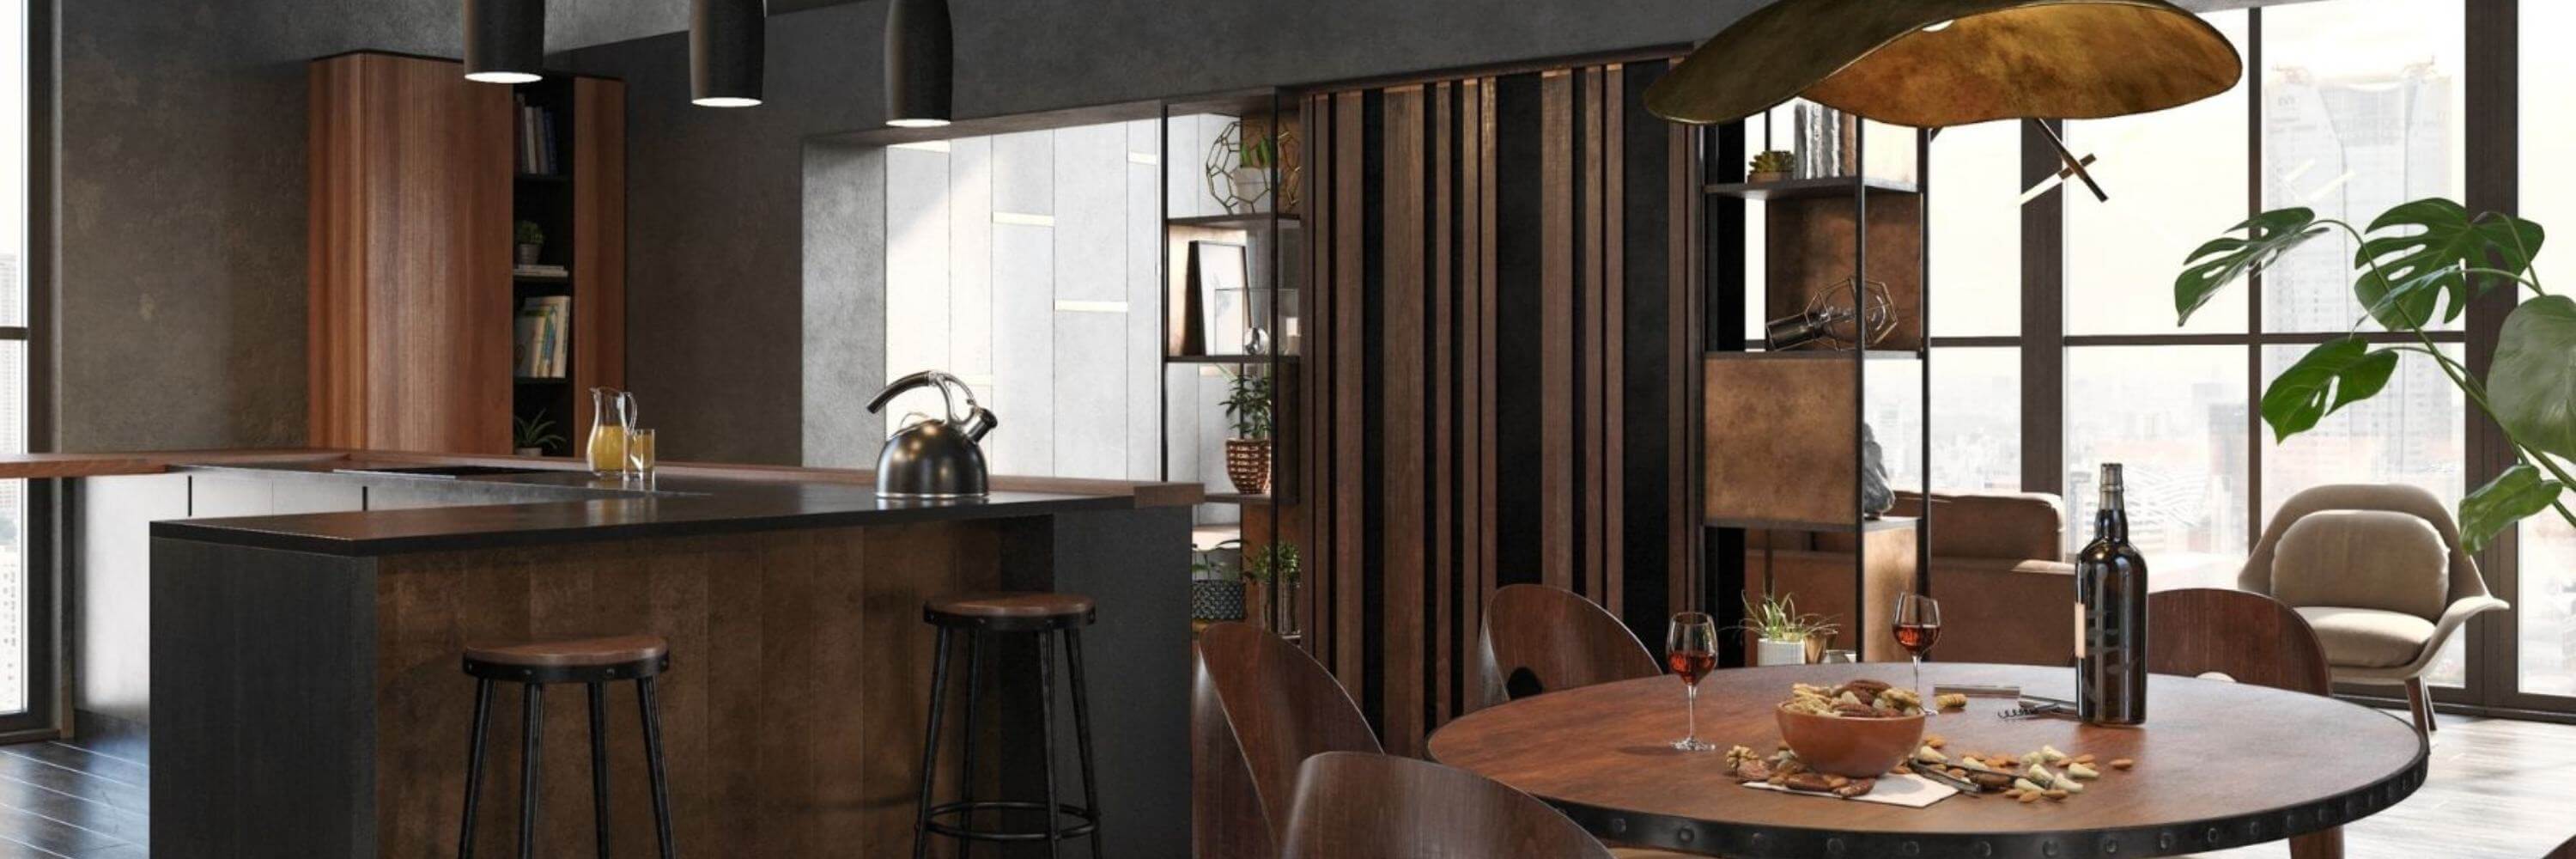 Industrial-style kitchen and dining room 